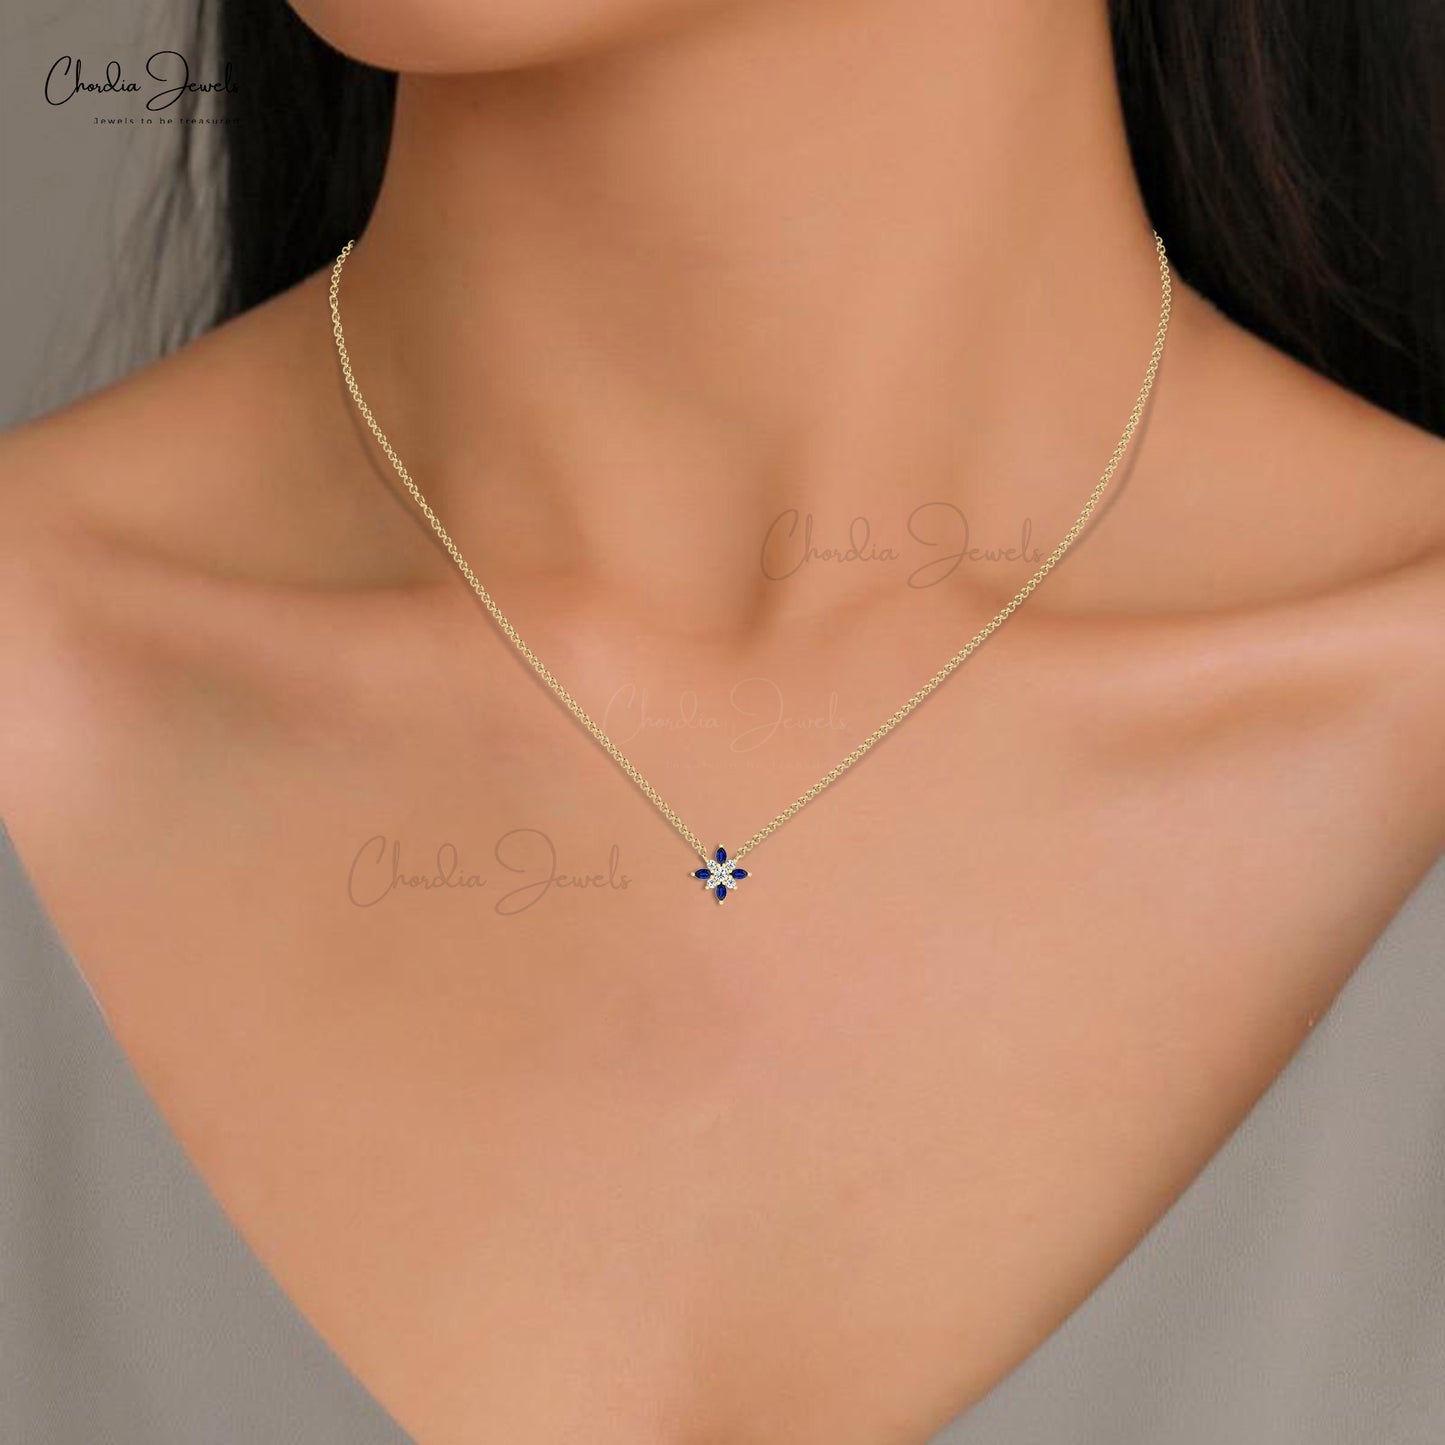 Natural Blue Sapphire 0.32 Ct September Birthstone Snow Flake Pendant 14k Real Gold Diamond Necklace Pendant Minimalist Jewelry For Anniversary Gift